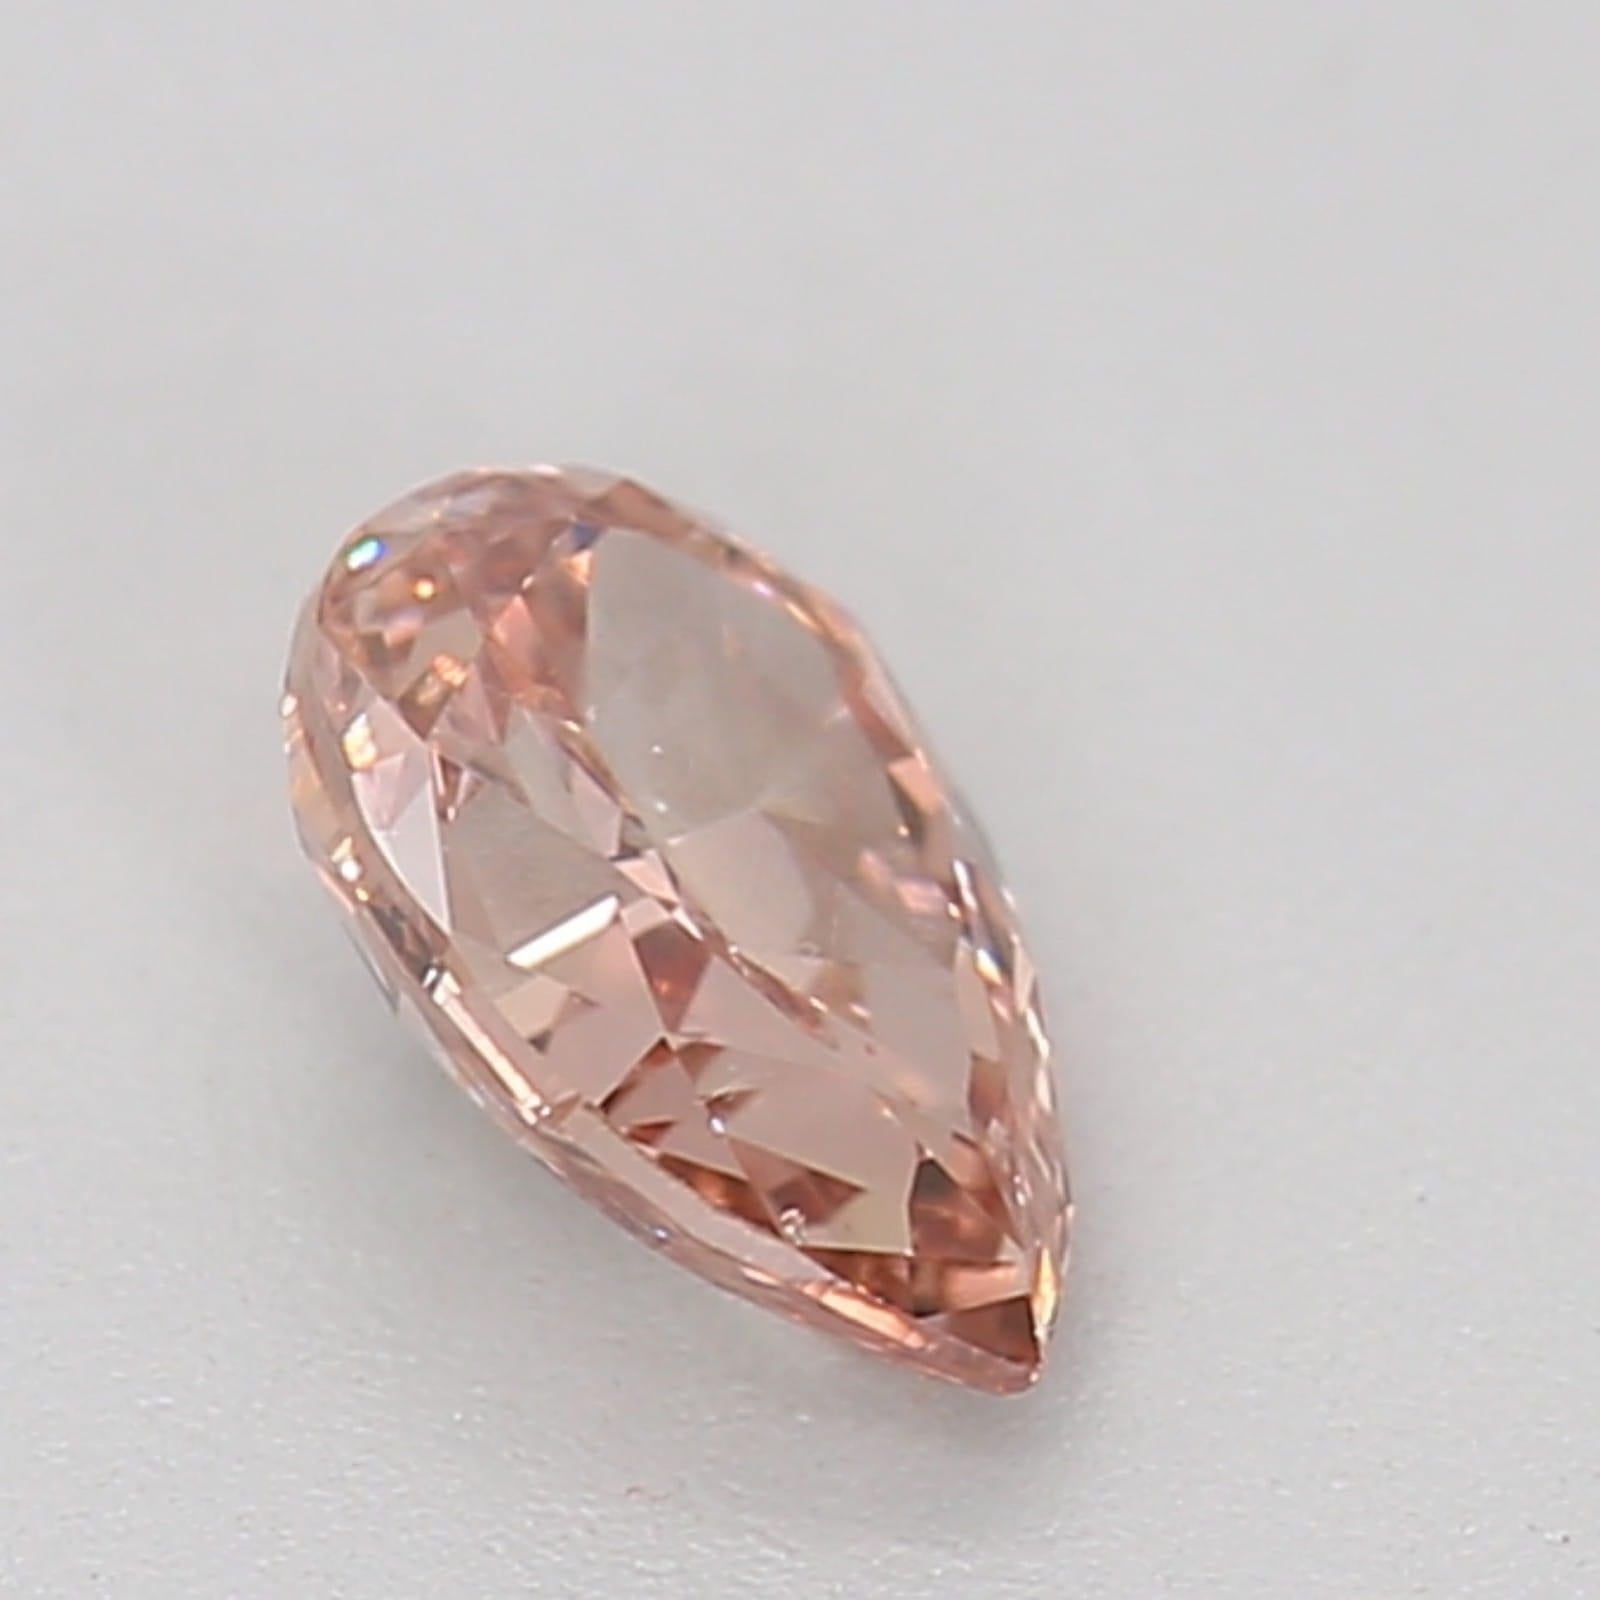 Pear Cut 0.33 Carat Fancy Brownish Orangy Pink Pear cut diamond GIA Certified For Sale